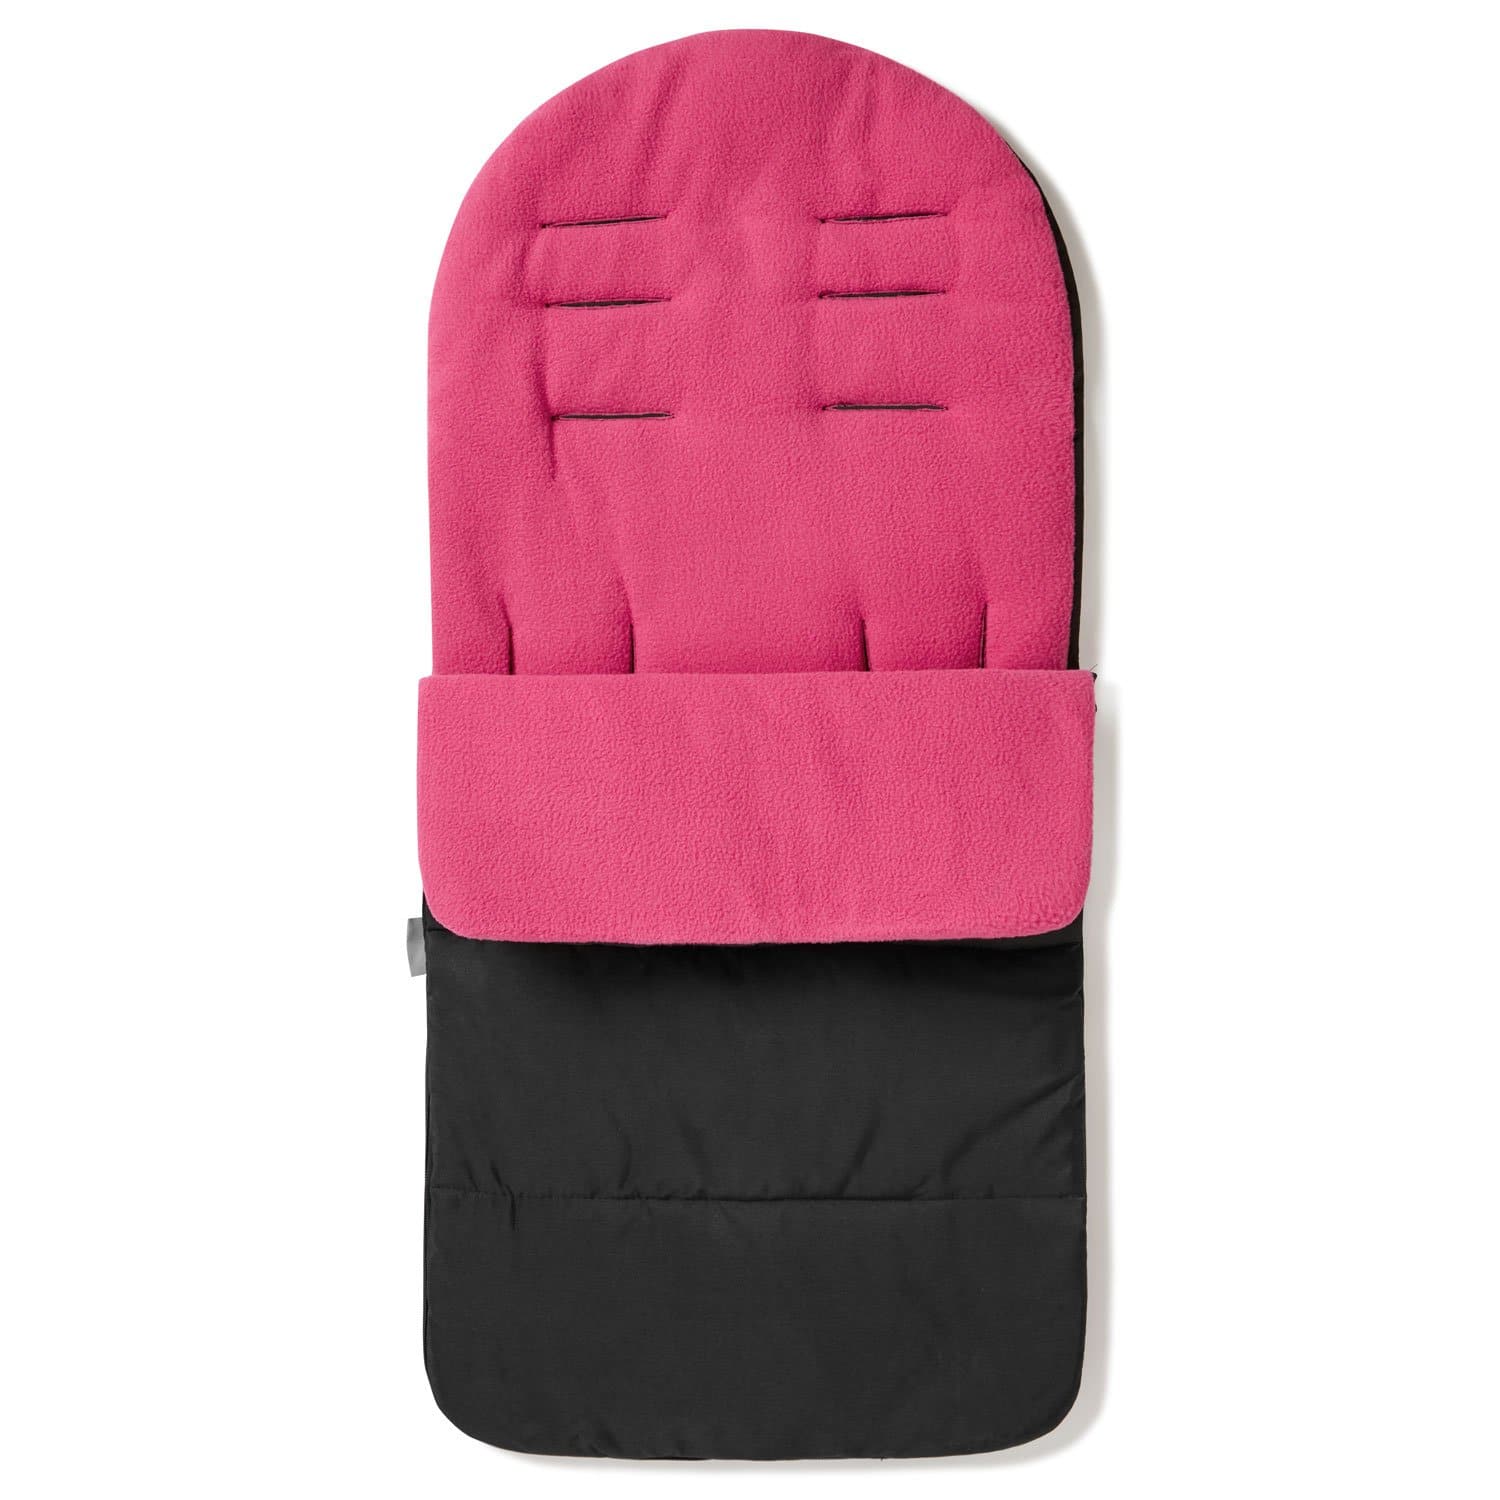 Premium Footmuff / Cosy Toes Compatible with Unilove - Pink Rose / Fits All Models | For Your Little One